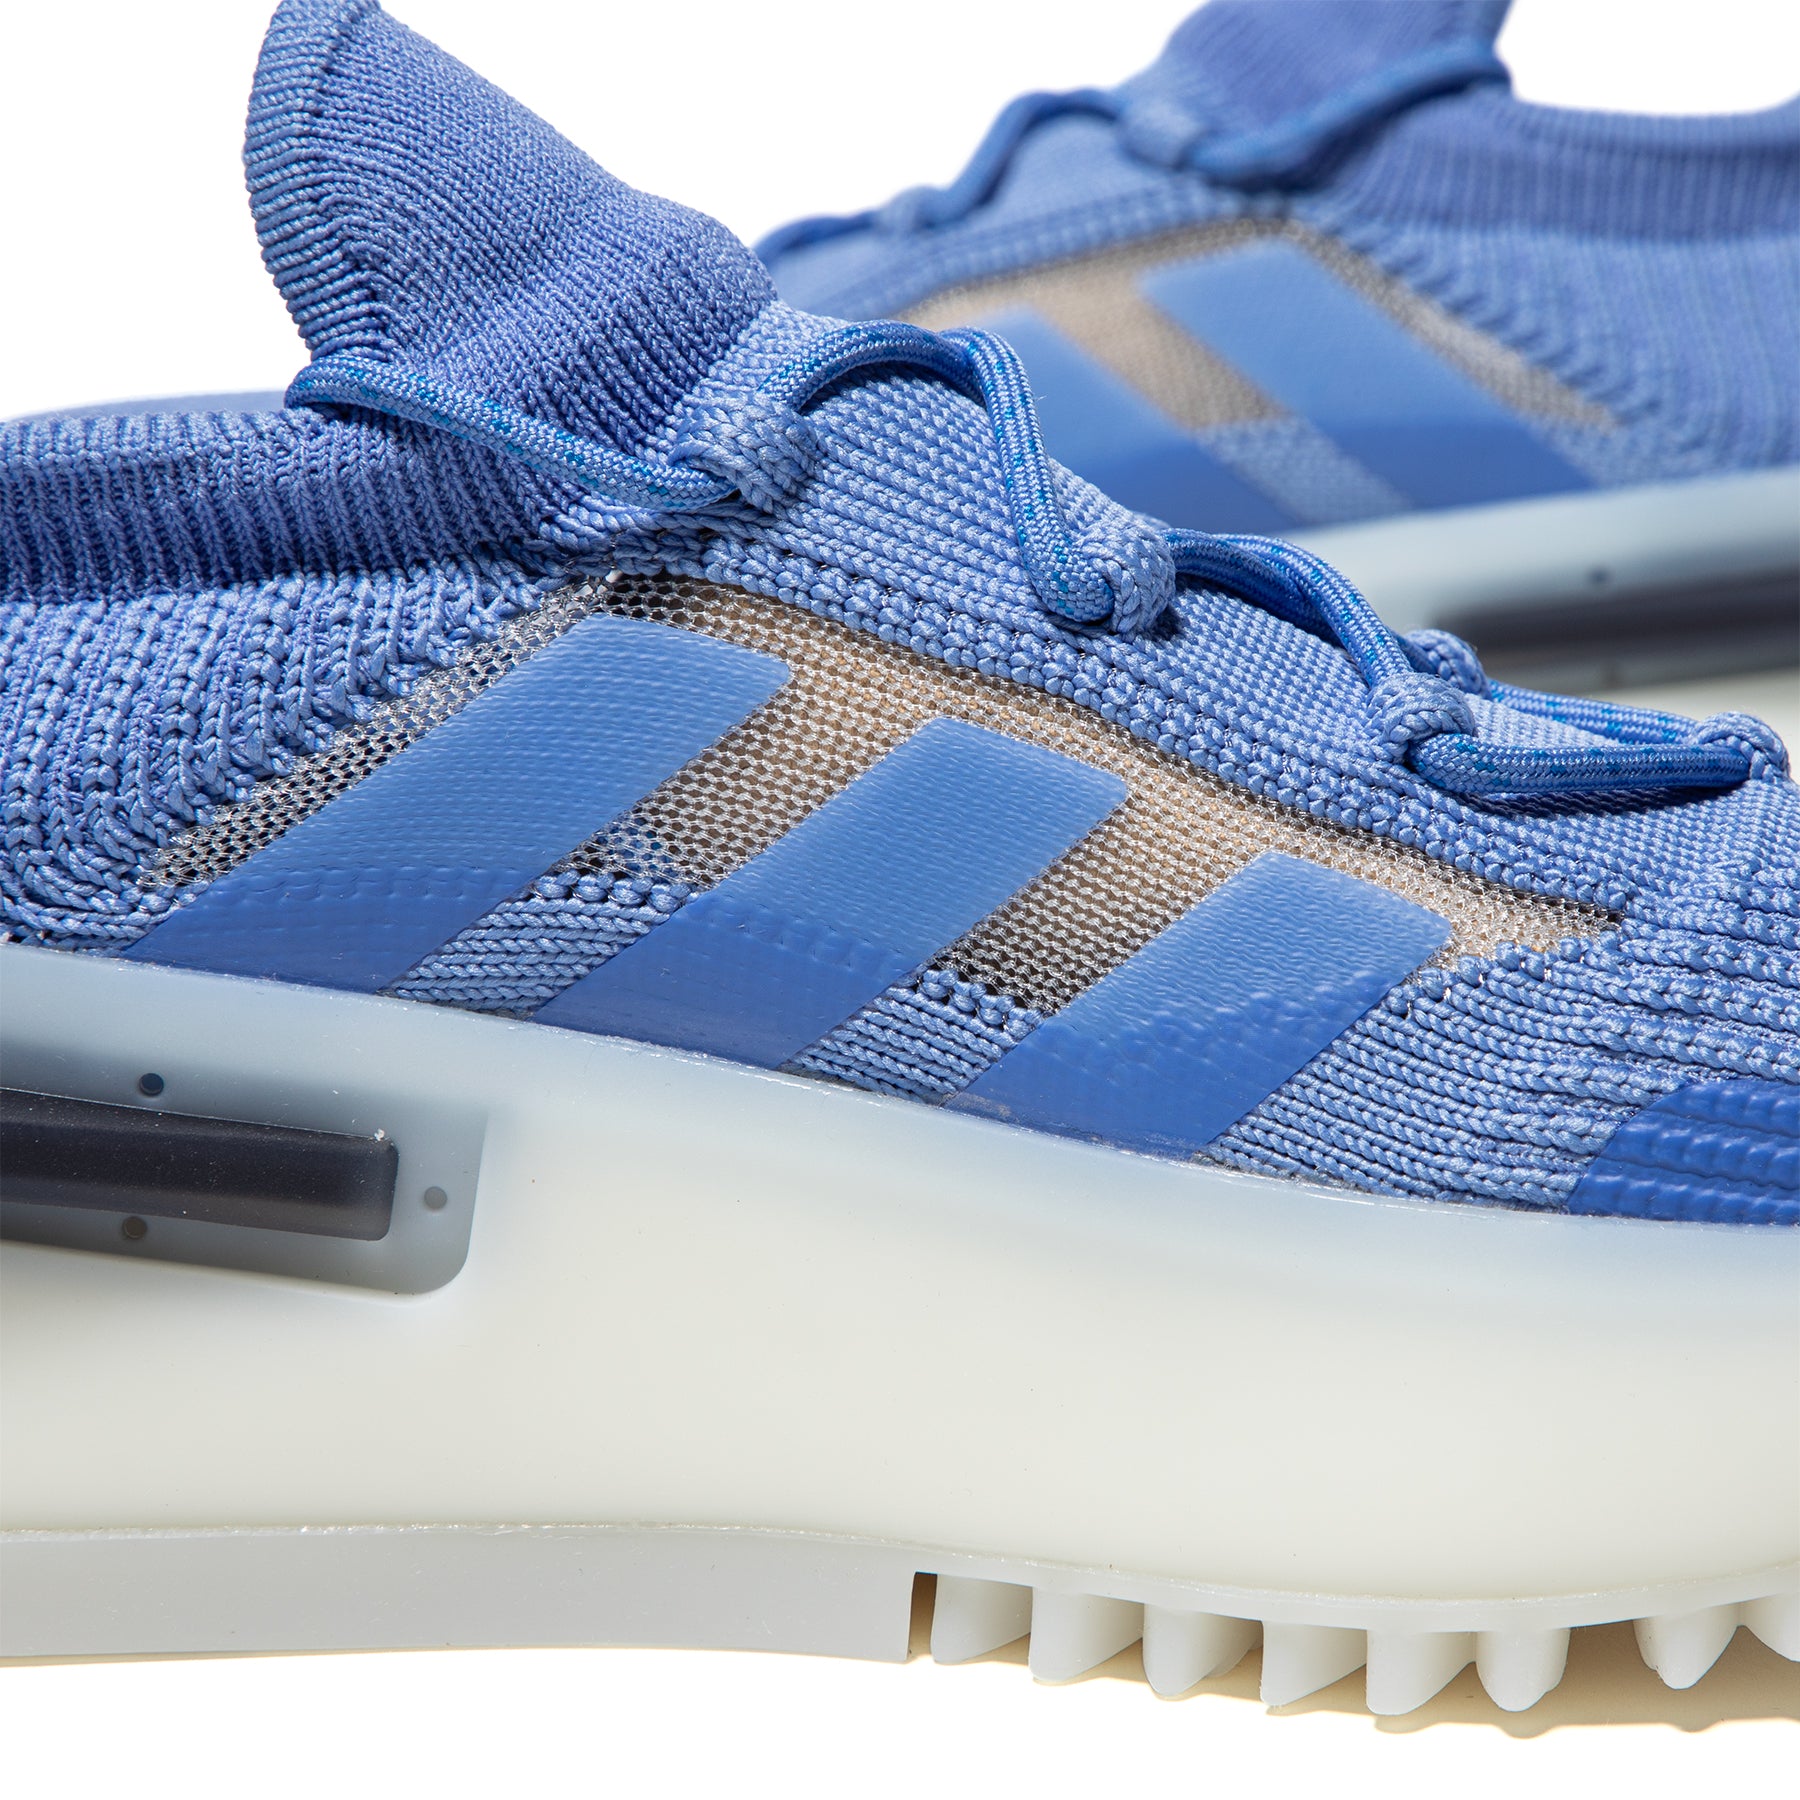 Concepts Fusion/Off S1 Womens NMD – (Blue White) adidas White/Cloud